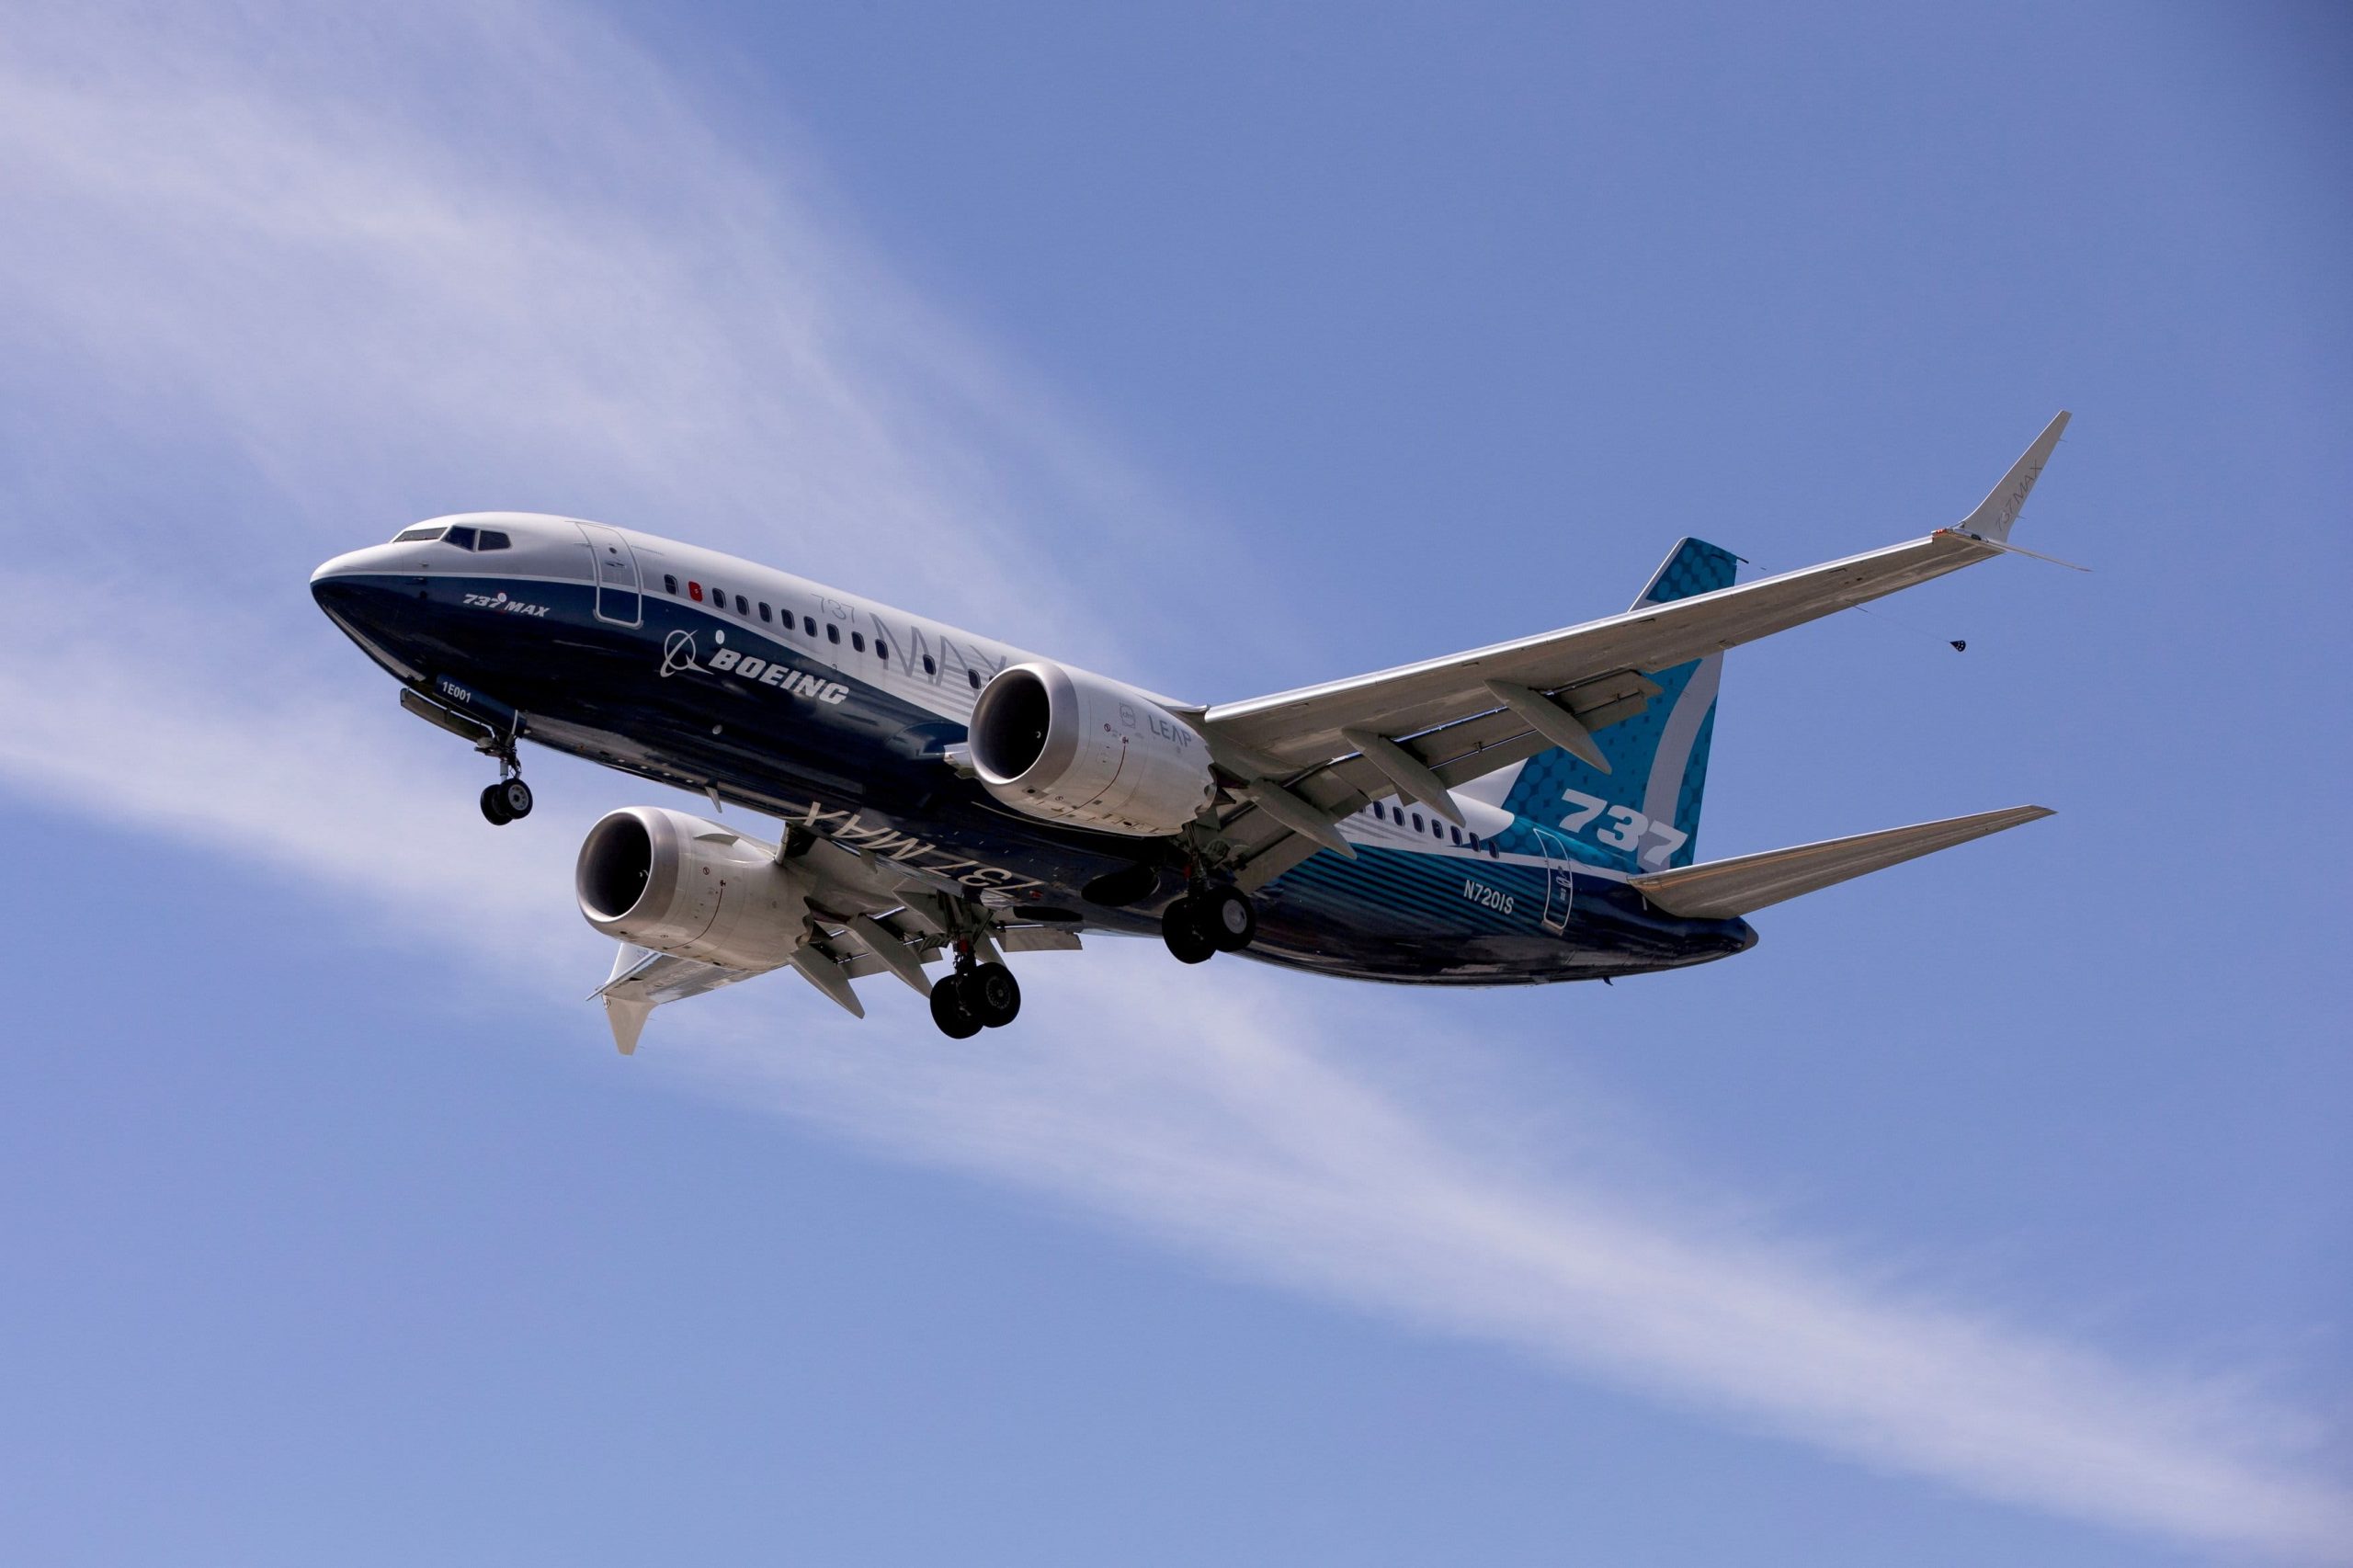 Boeing airplane deliveries slipped in February, Dreamliner problem lingers